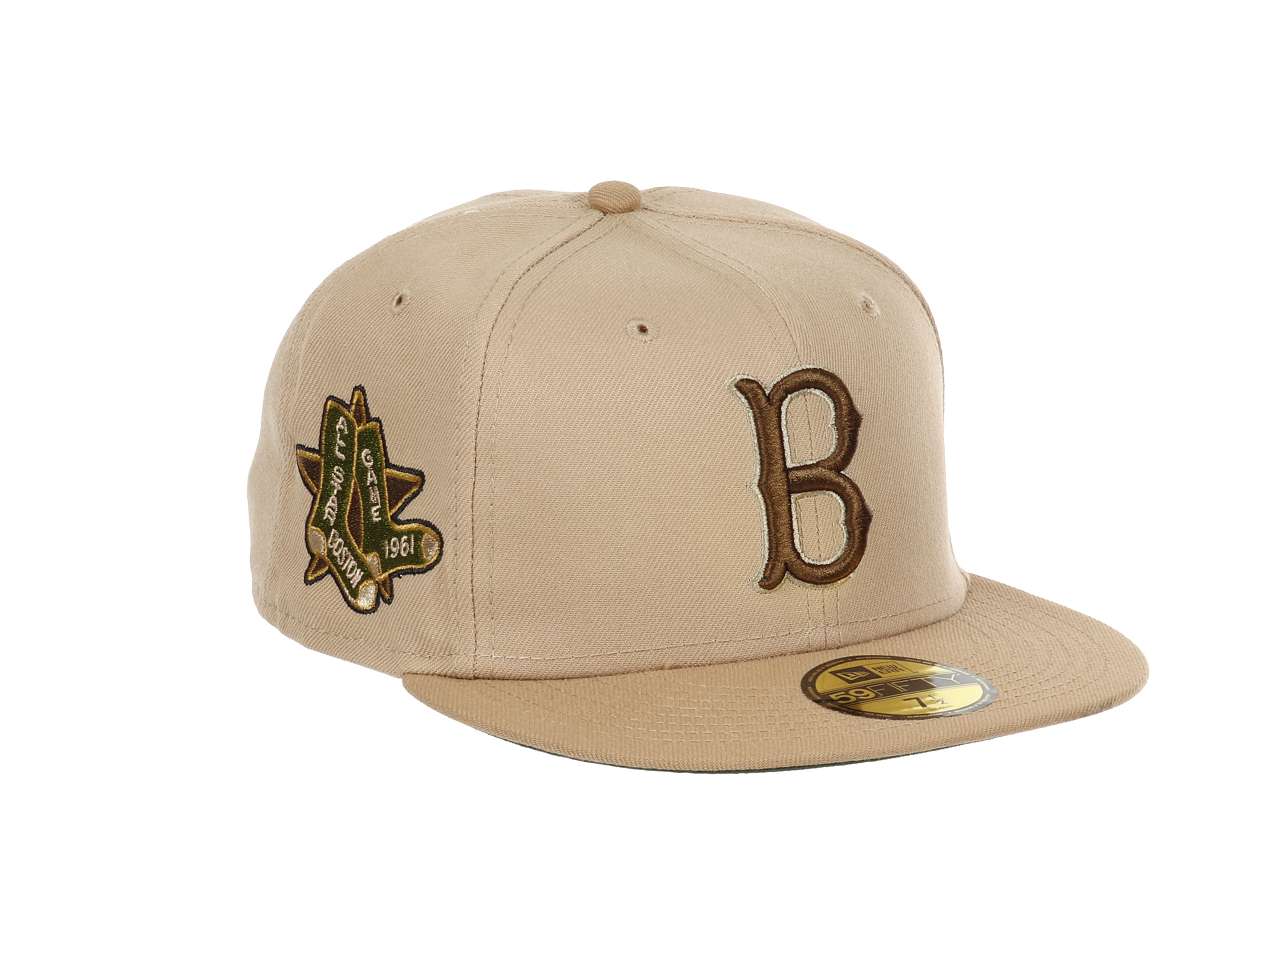 Boston Red Sox MLB Cooperstown 1961 All Star Game Camel 59Fifty Basecap New Era